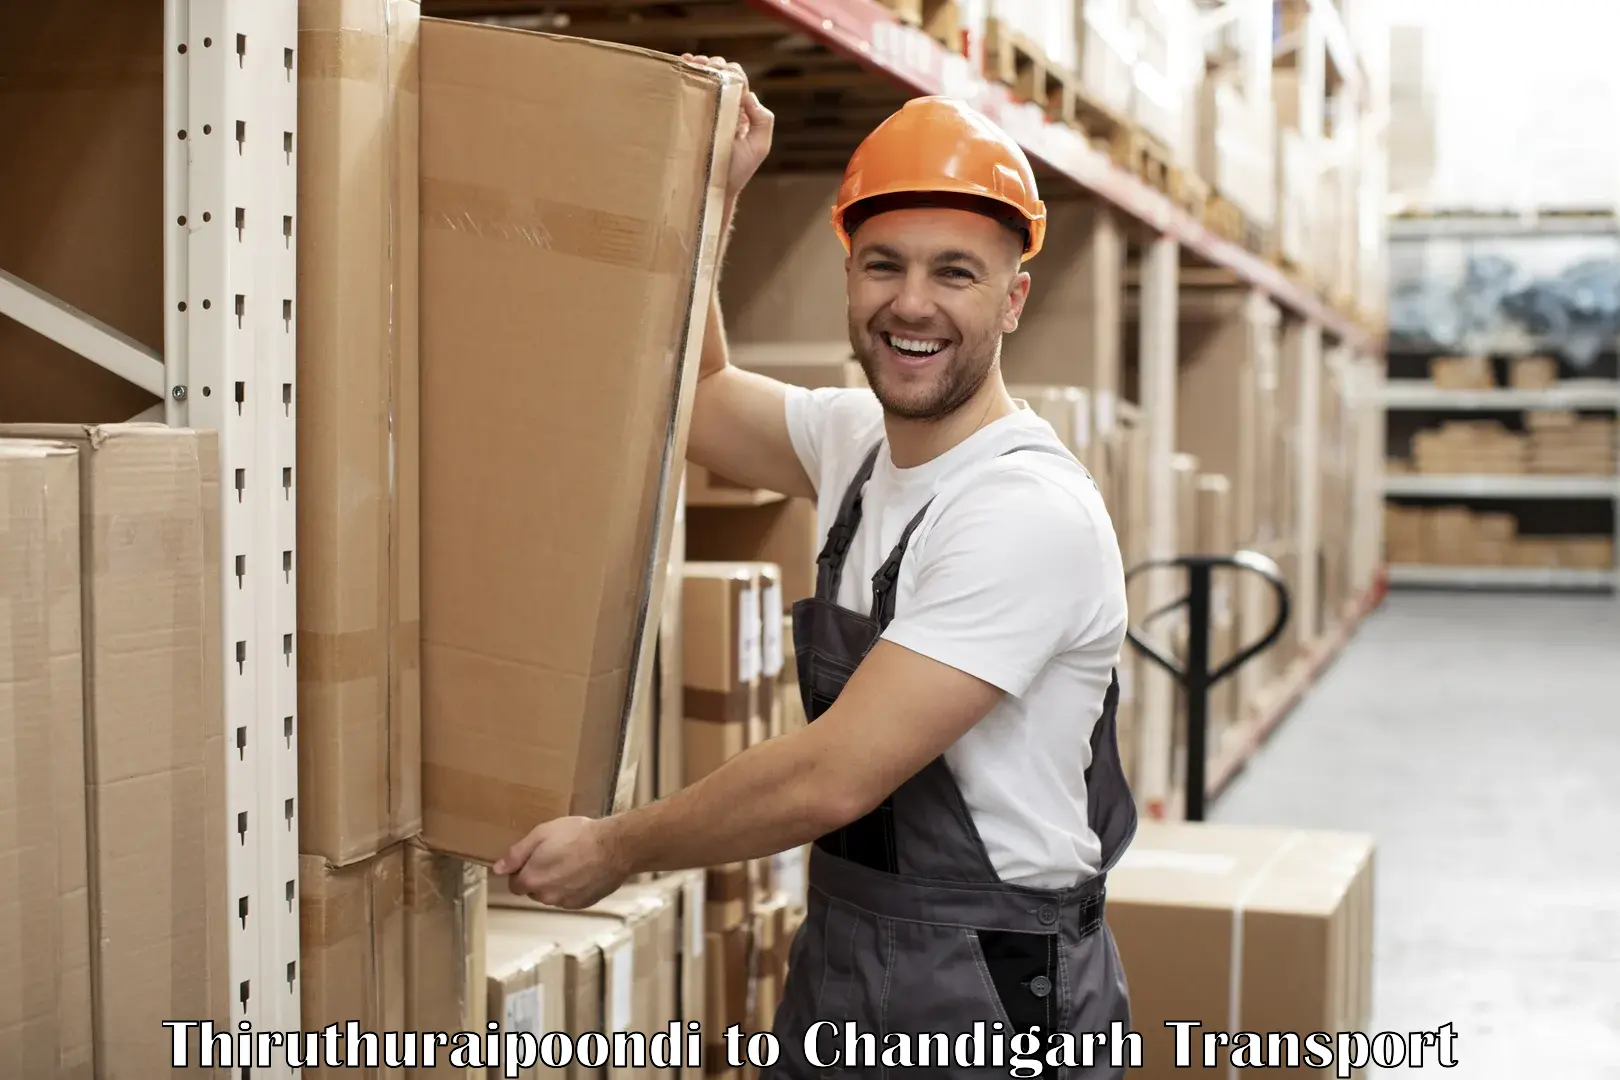 Part load transport service in India Thiruthuraipoondi to Chandigarh